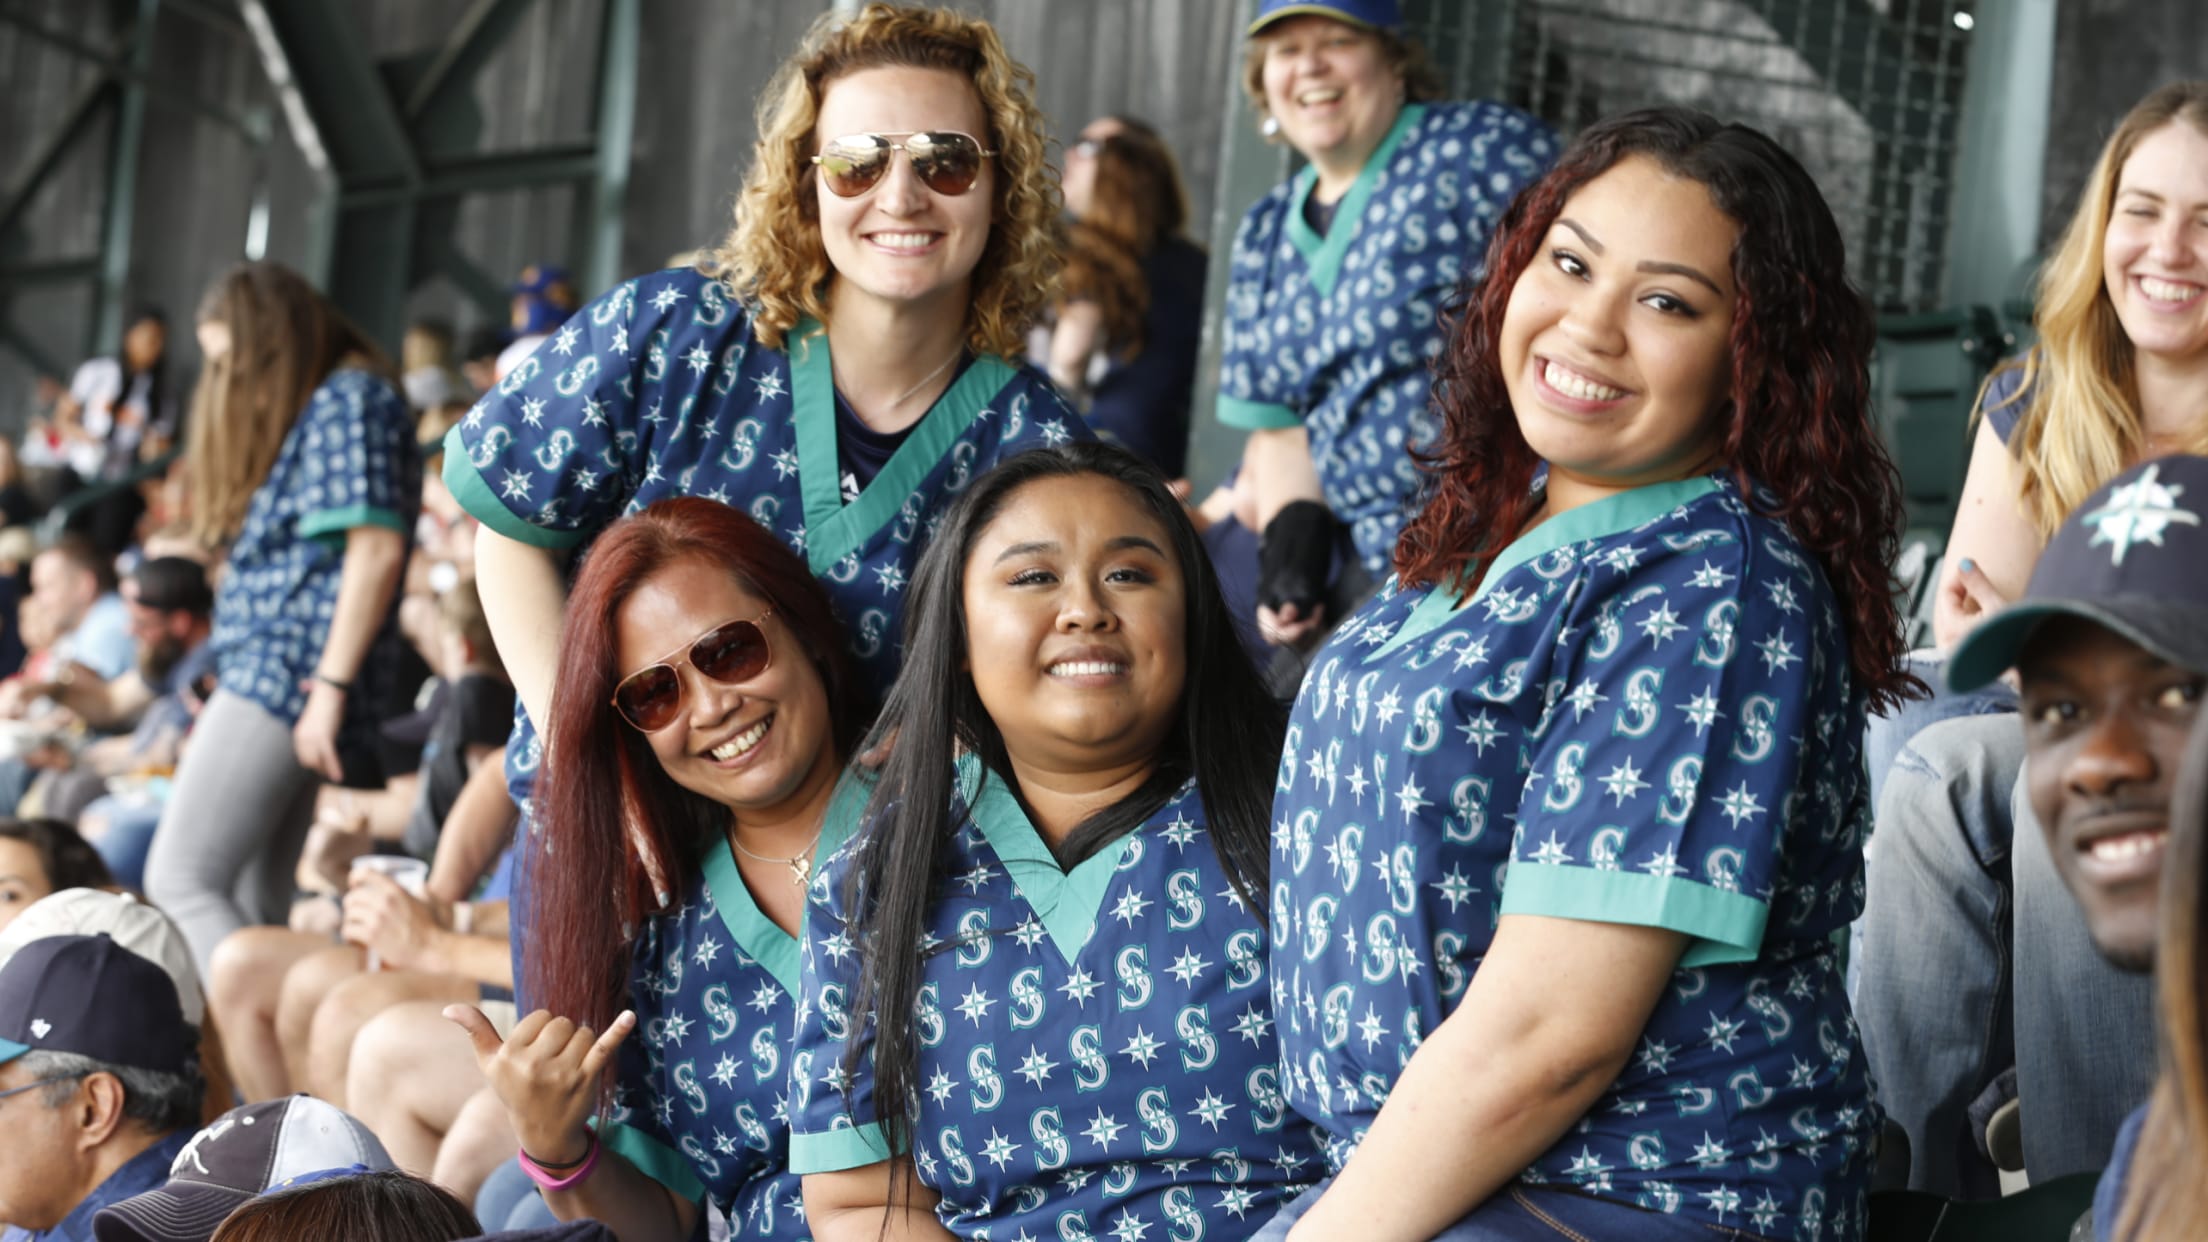 Theme and Community Nights Seattle Mariners